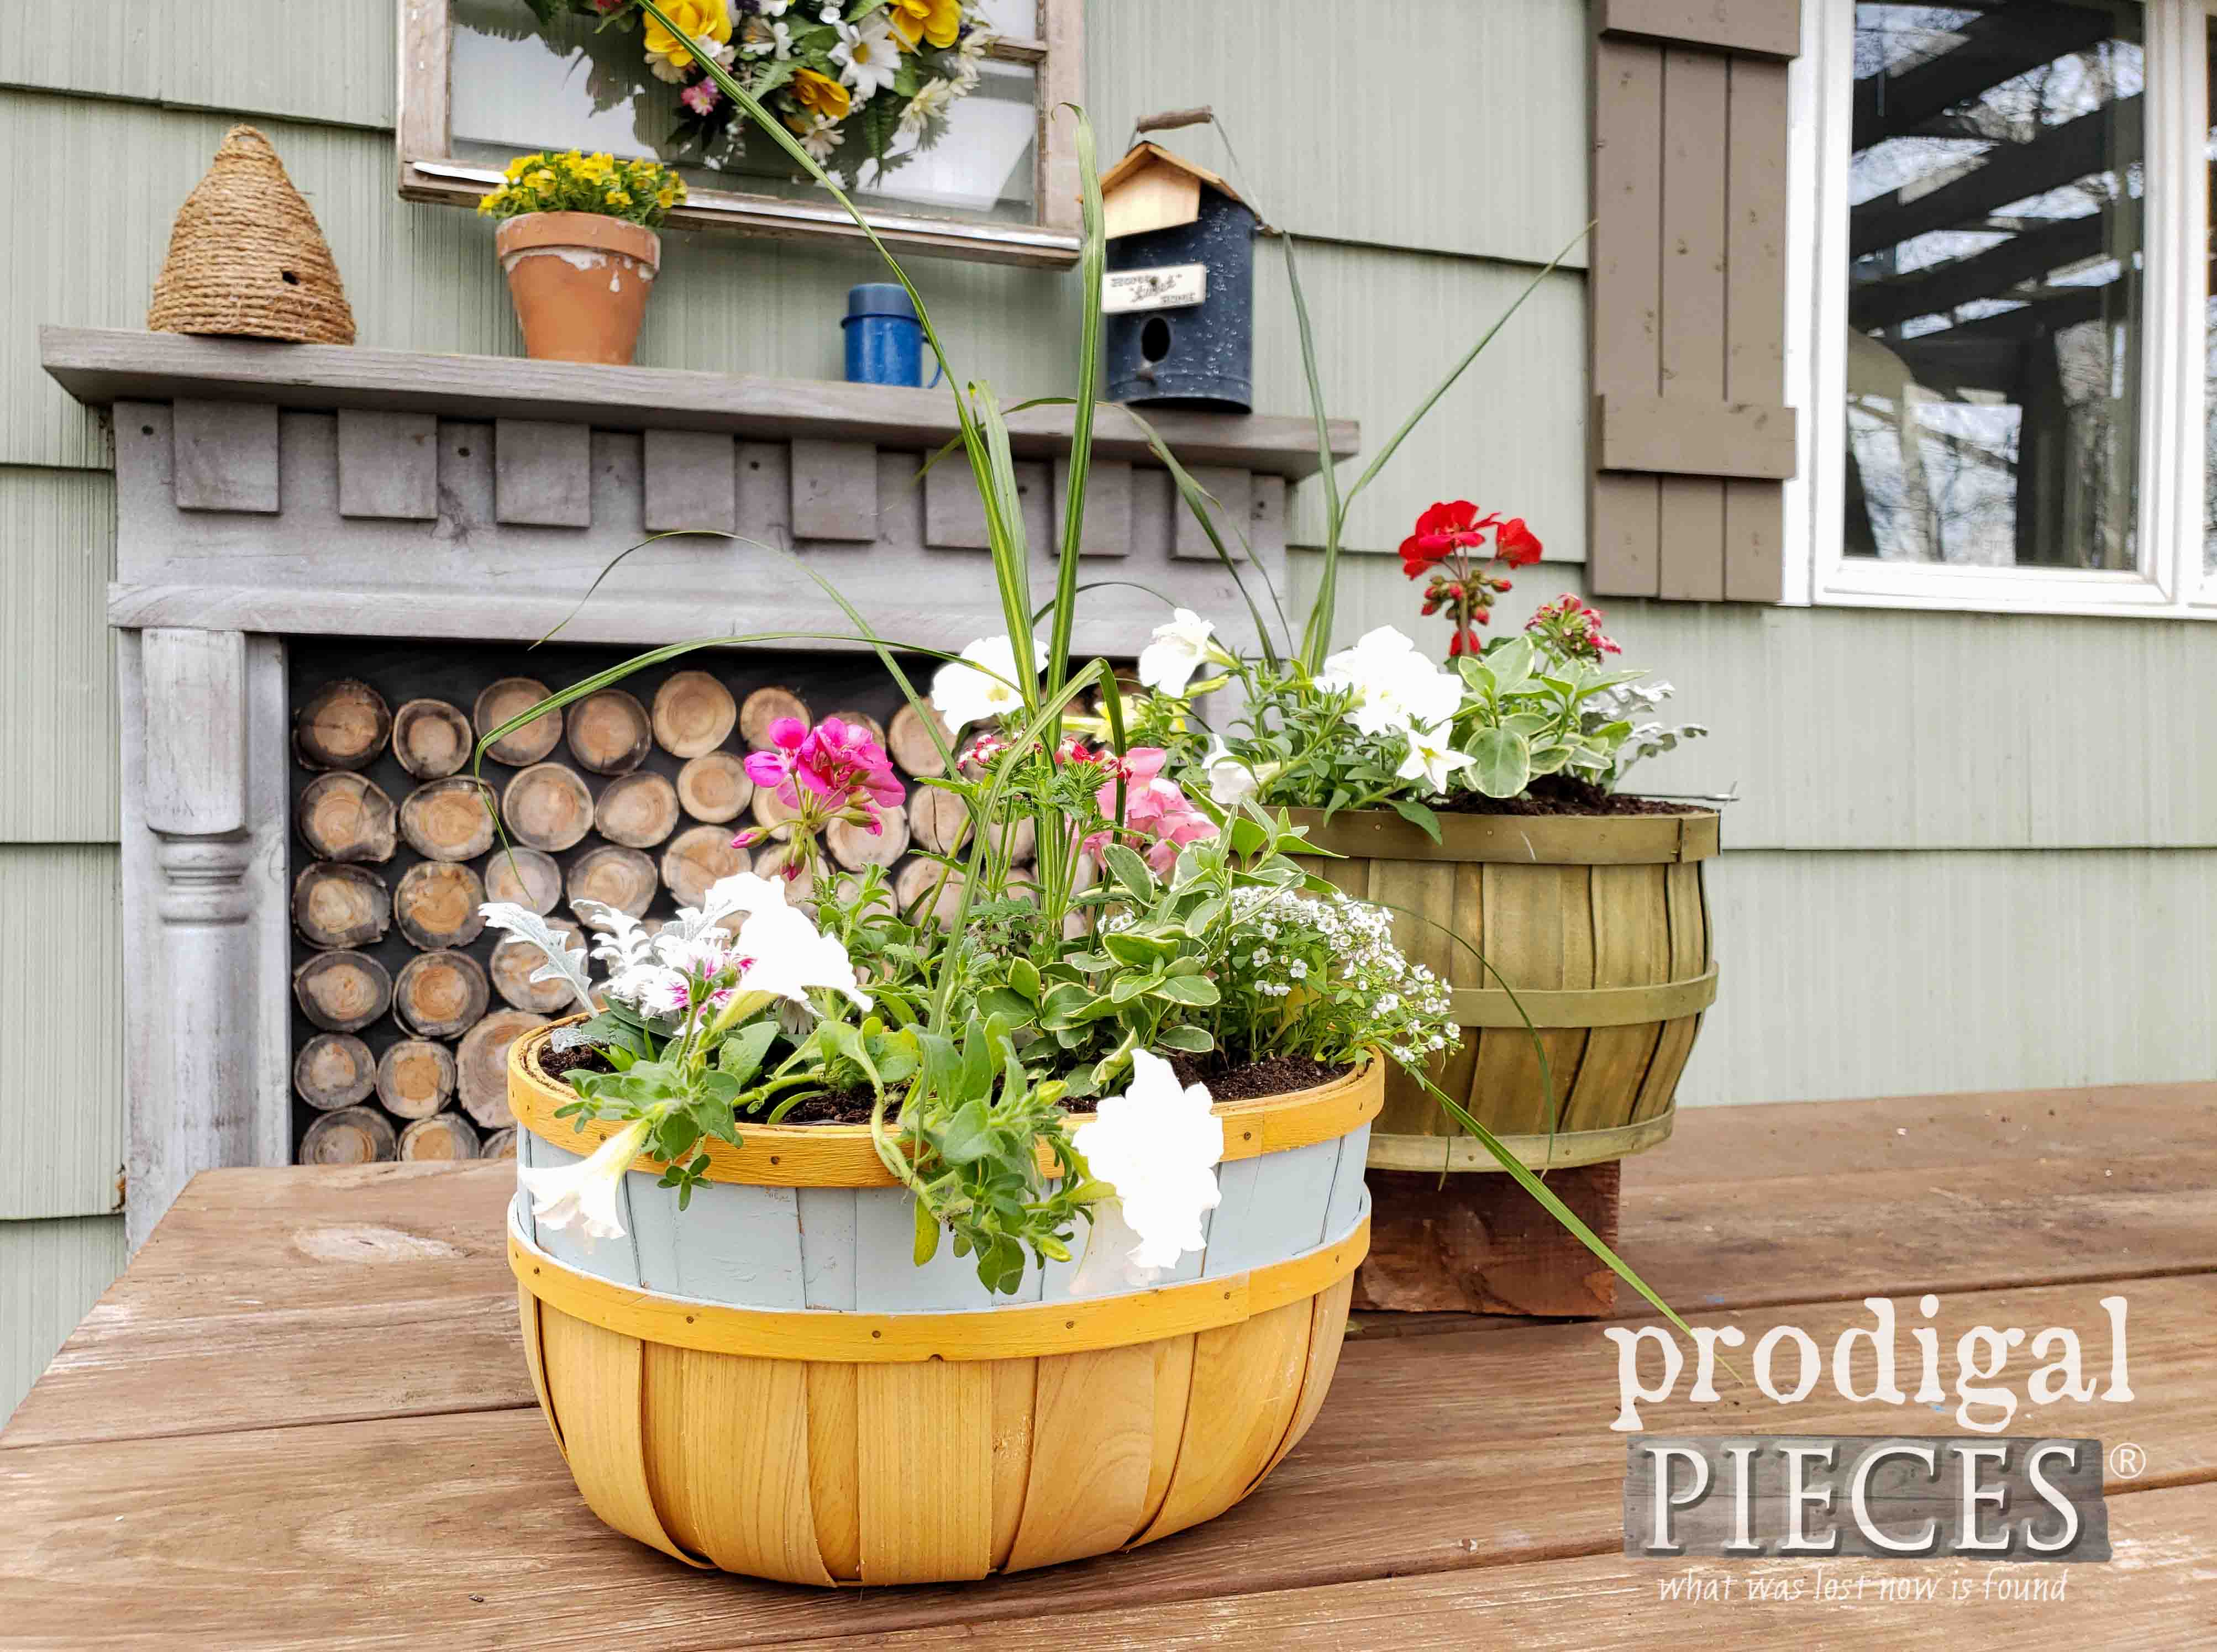 DIY Budget-Friendly Mother's Day Flower Basket Video Tutorial | Get the kids involved and have fun! | Head to prodigalpieces.com #prodigalpieces #diy #flowers #mothersday #giftideas #home #homedecor #garden